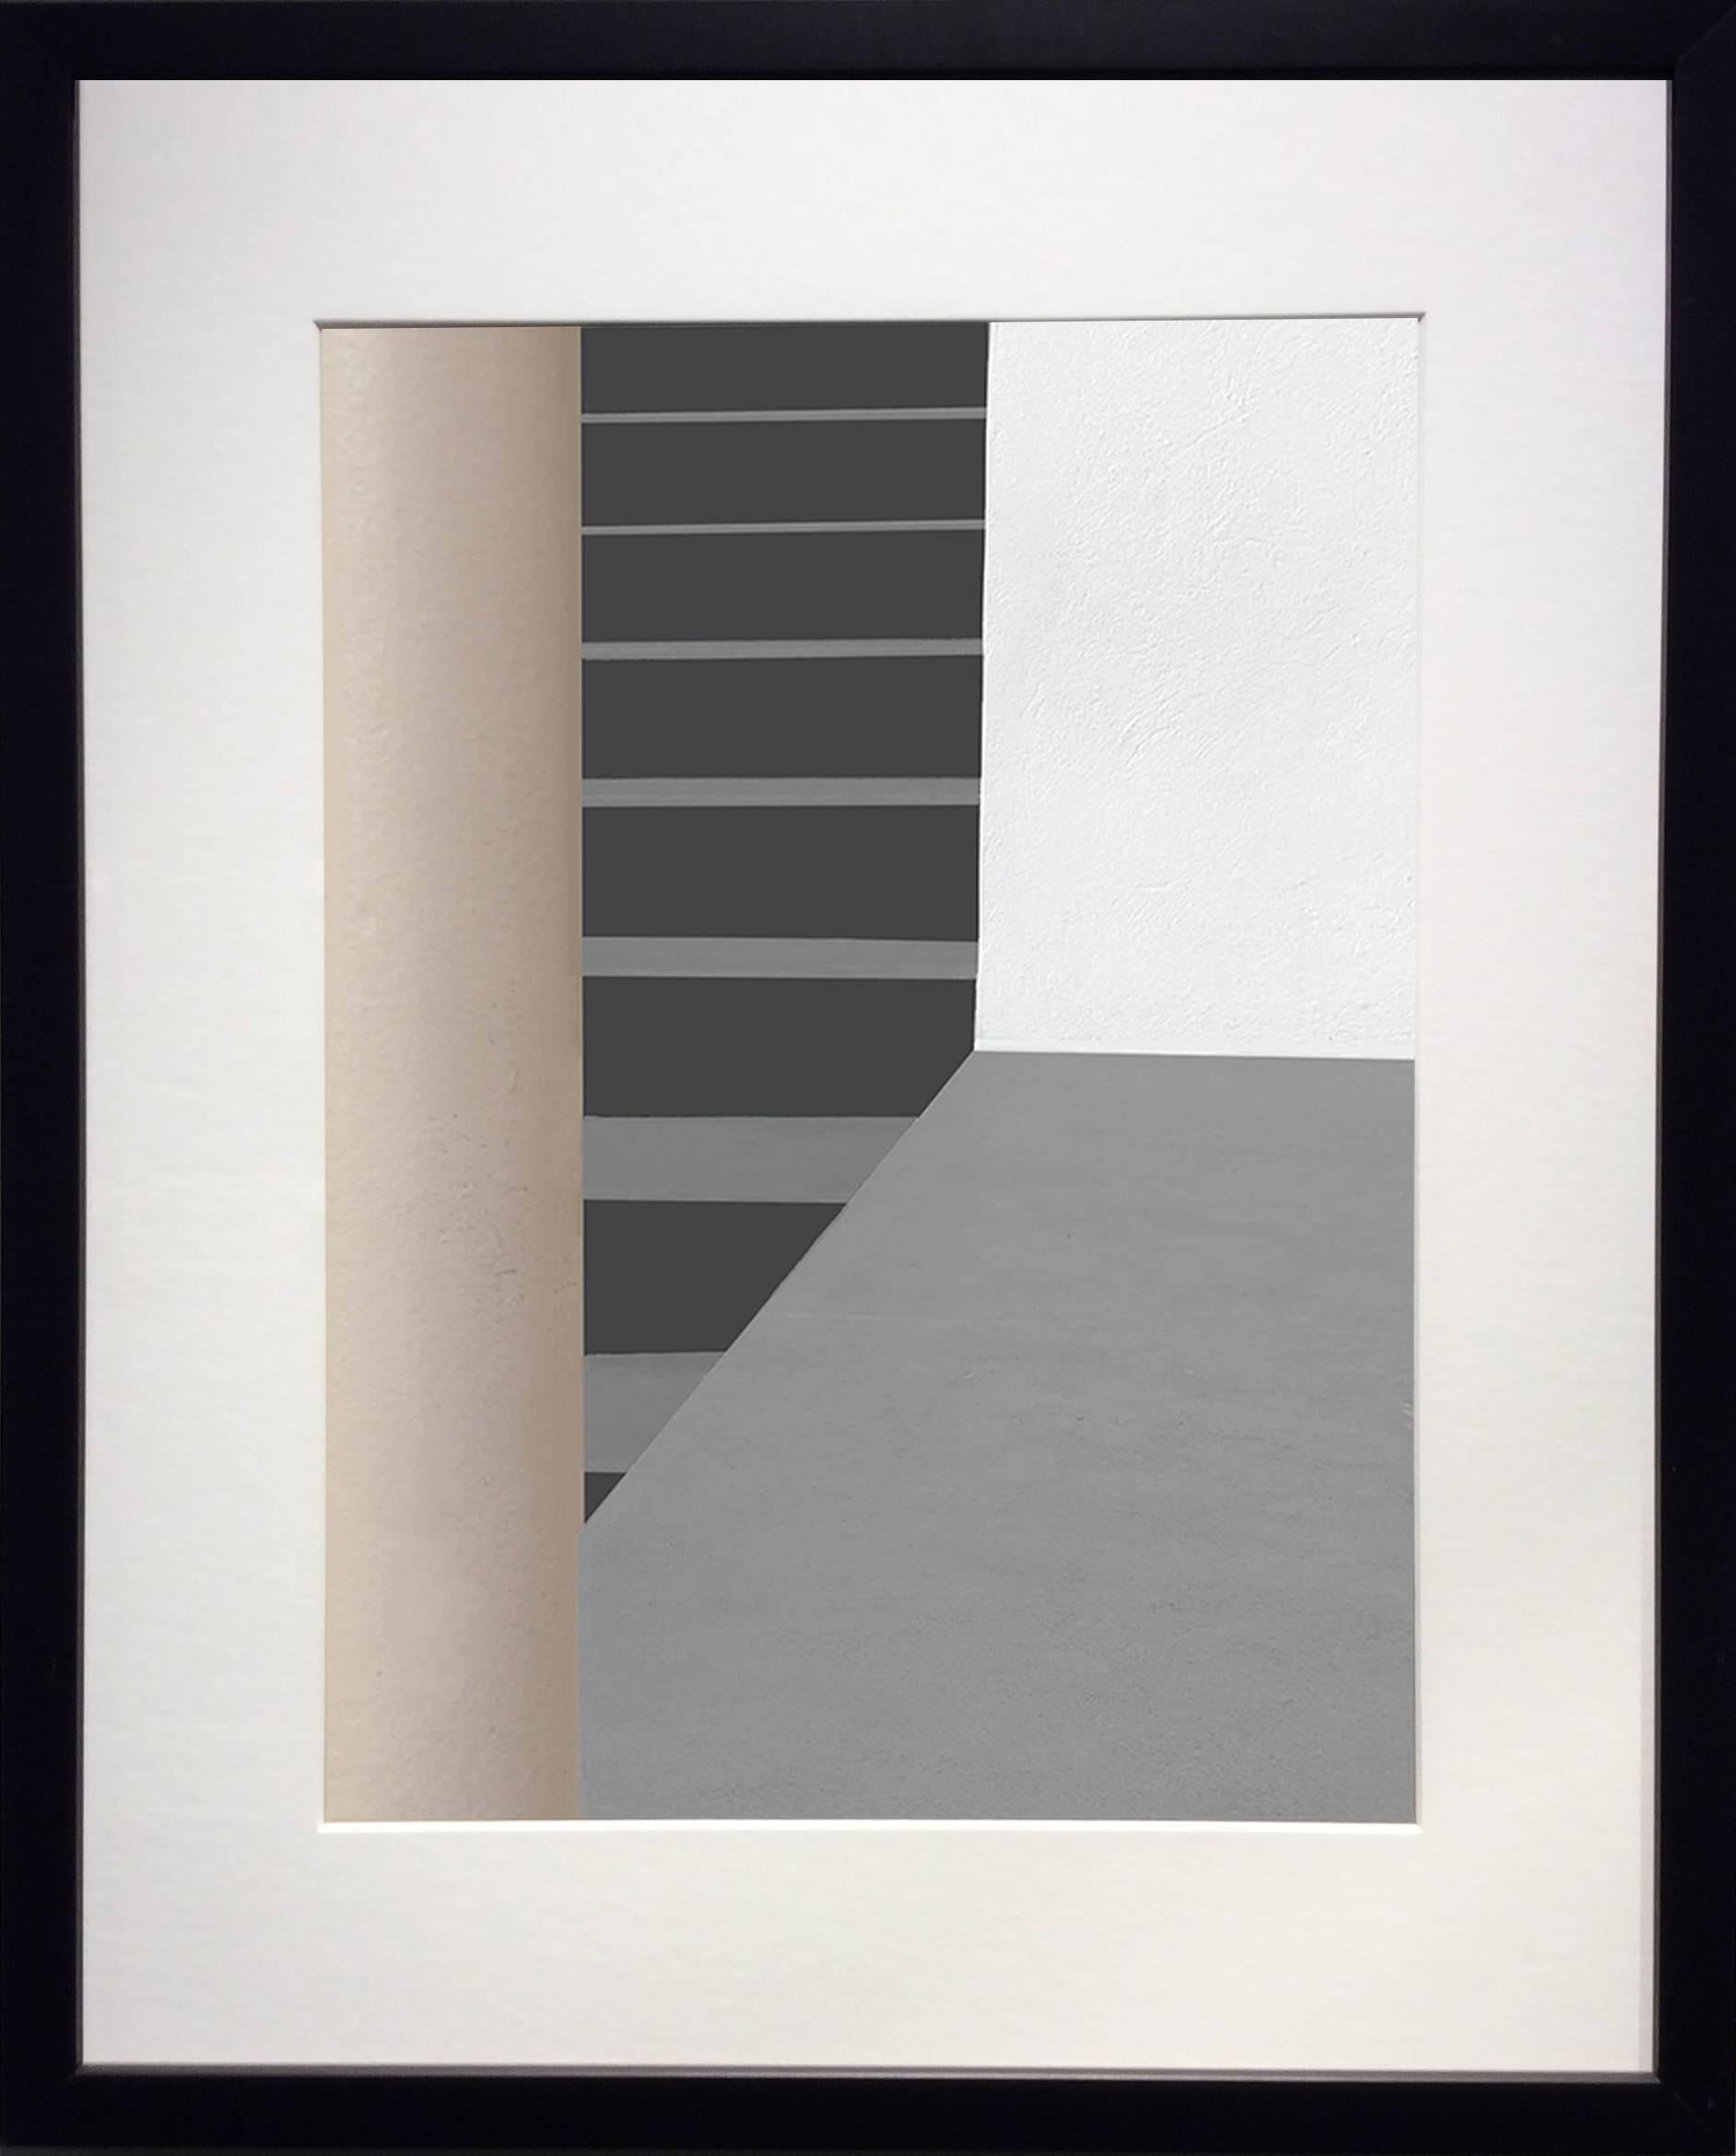 Columns and Stairs (Modern Abstracted Inkjet Print of Minimalist Interior) - Photograph by Stephanie Blumenthal